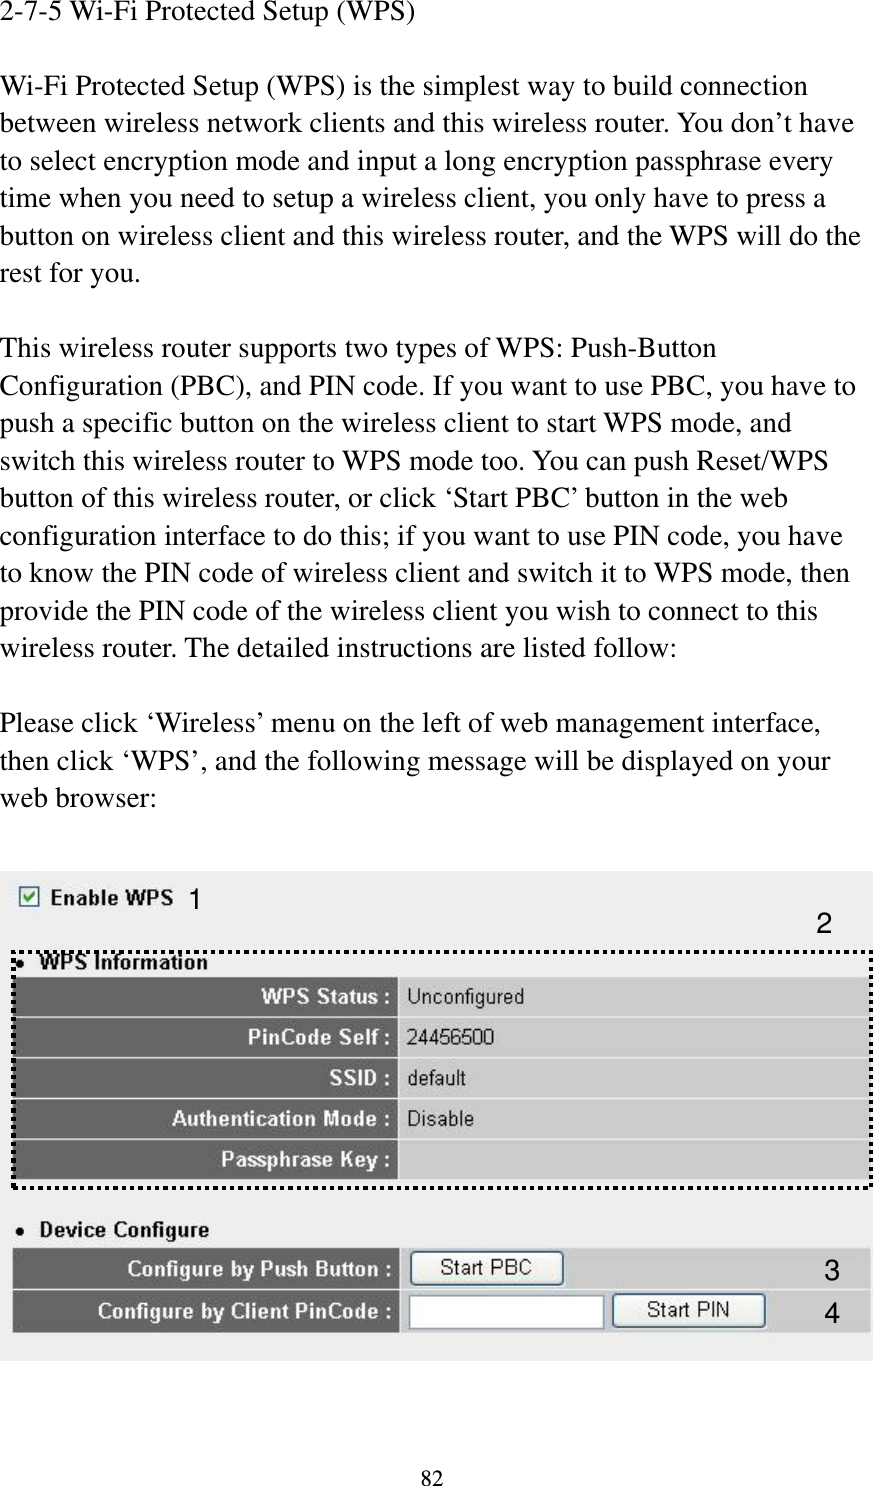 82 2-7-5 Wi-Fi Protected Setup (WPS)  Wi-Fi Protected Setup (WPS) is the simplest way to build connection between wireless network clients and this wireless router. You don’t have to select encryption mode and input a long encryption passphrase every time when you need to setup a wireless client, you only have to press a button on wireless client and this wireless router, and the WPS will do the rest for you.  This wireless router supports two types of WPS: Push-Button Configuration (PBC), and PIN code. If you want to use PBC, you have to push a specific button on the wireless client to start WPS mode, and switch this wireless router to WPS mode too. You can push Reset/WPS button of this wireless router, or click ‘Start PBC’ button in the web configuration interface to do this; if you want to use PIN code, you have to know the PIN code of wireless client and switch it to WPS mode, then provide the PIN code of the wireless client you wish to connect to this wireless router. The detailed instructions are listed follow:  Please click ‘Wireless’ menu on the left of web management interface, then click ‘WPS’, and the following message will be displayed on your web browser:    1 34 2